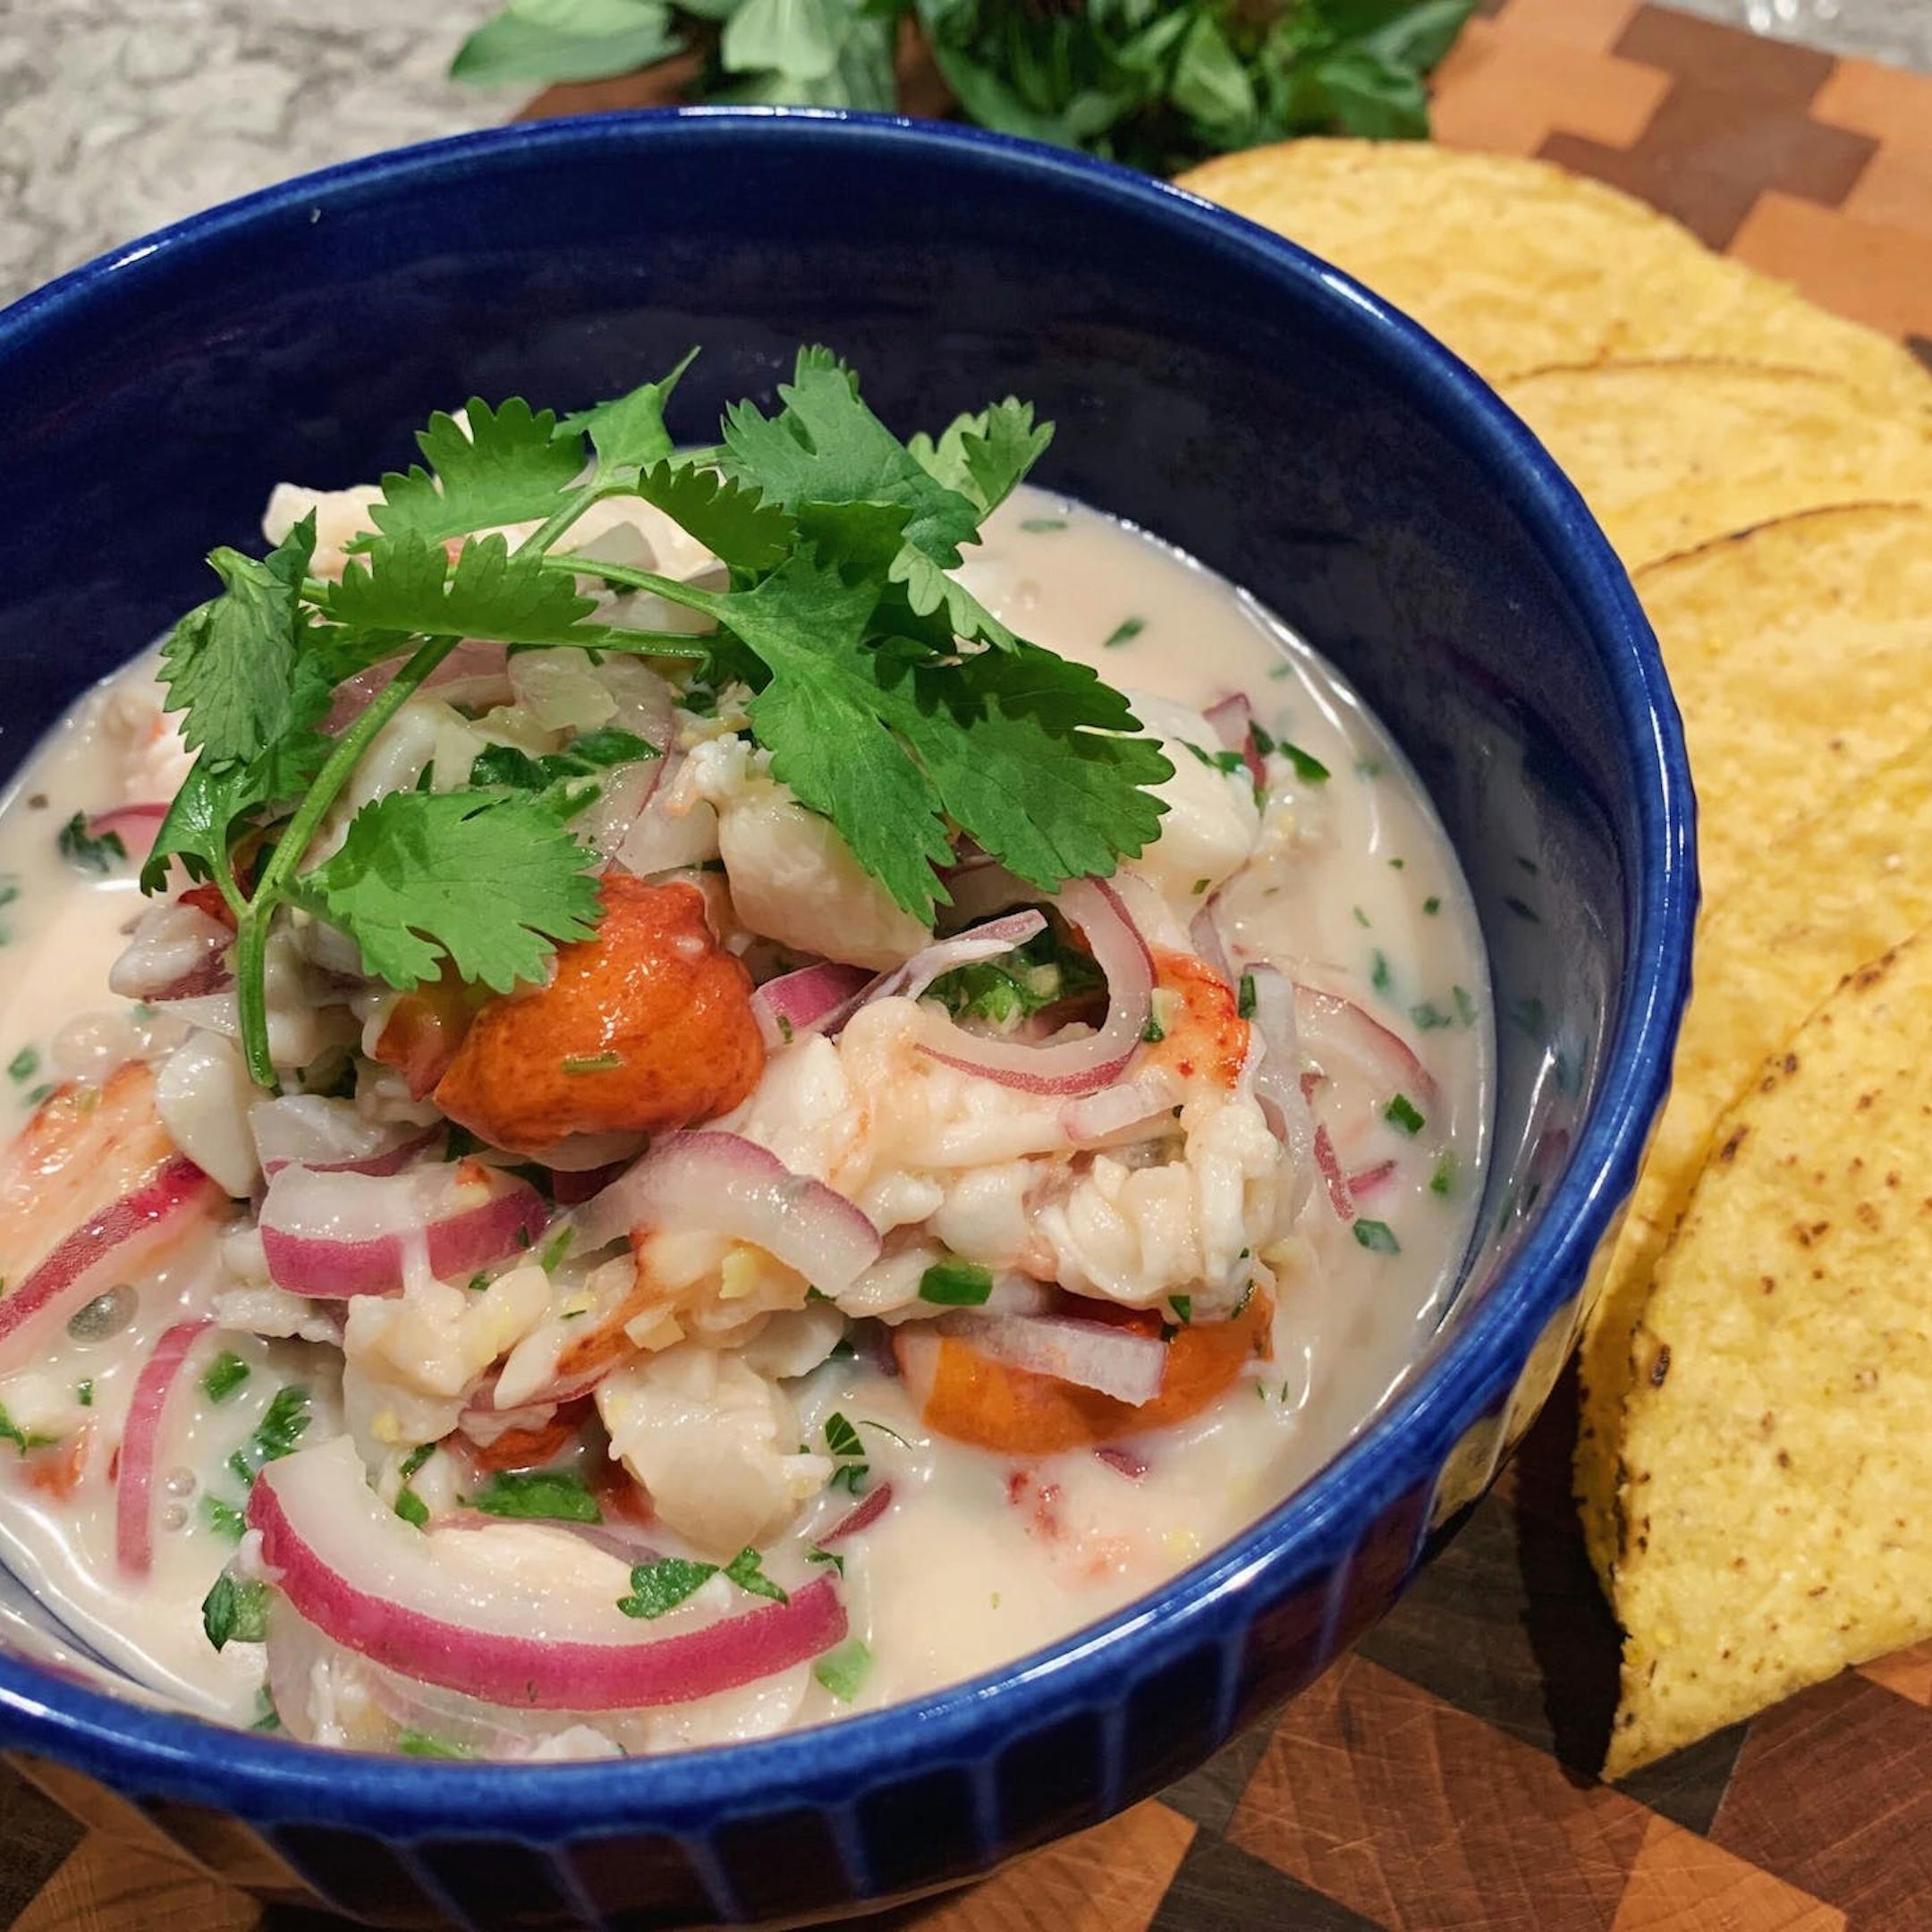 Cold Cracked Lobster Ceviche